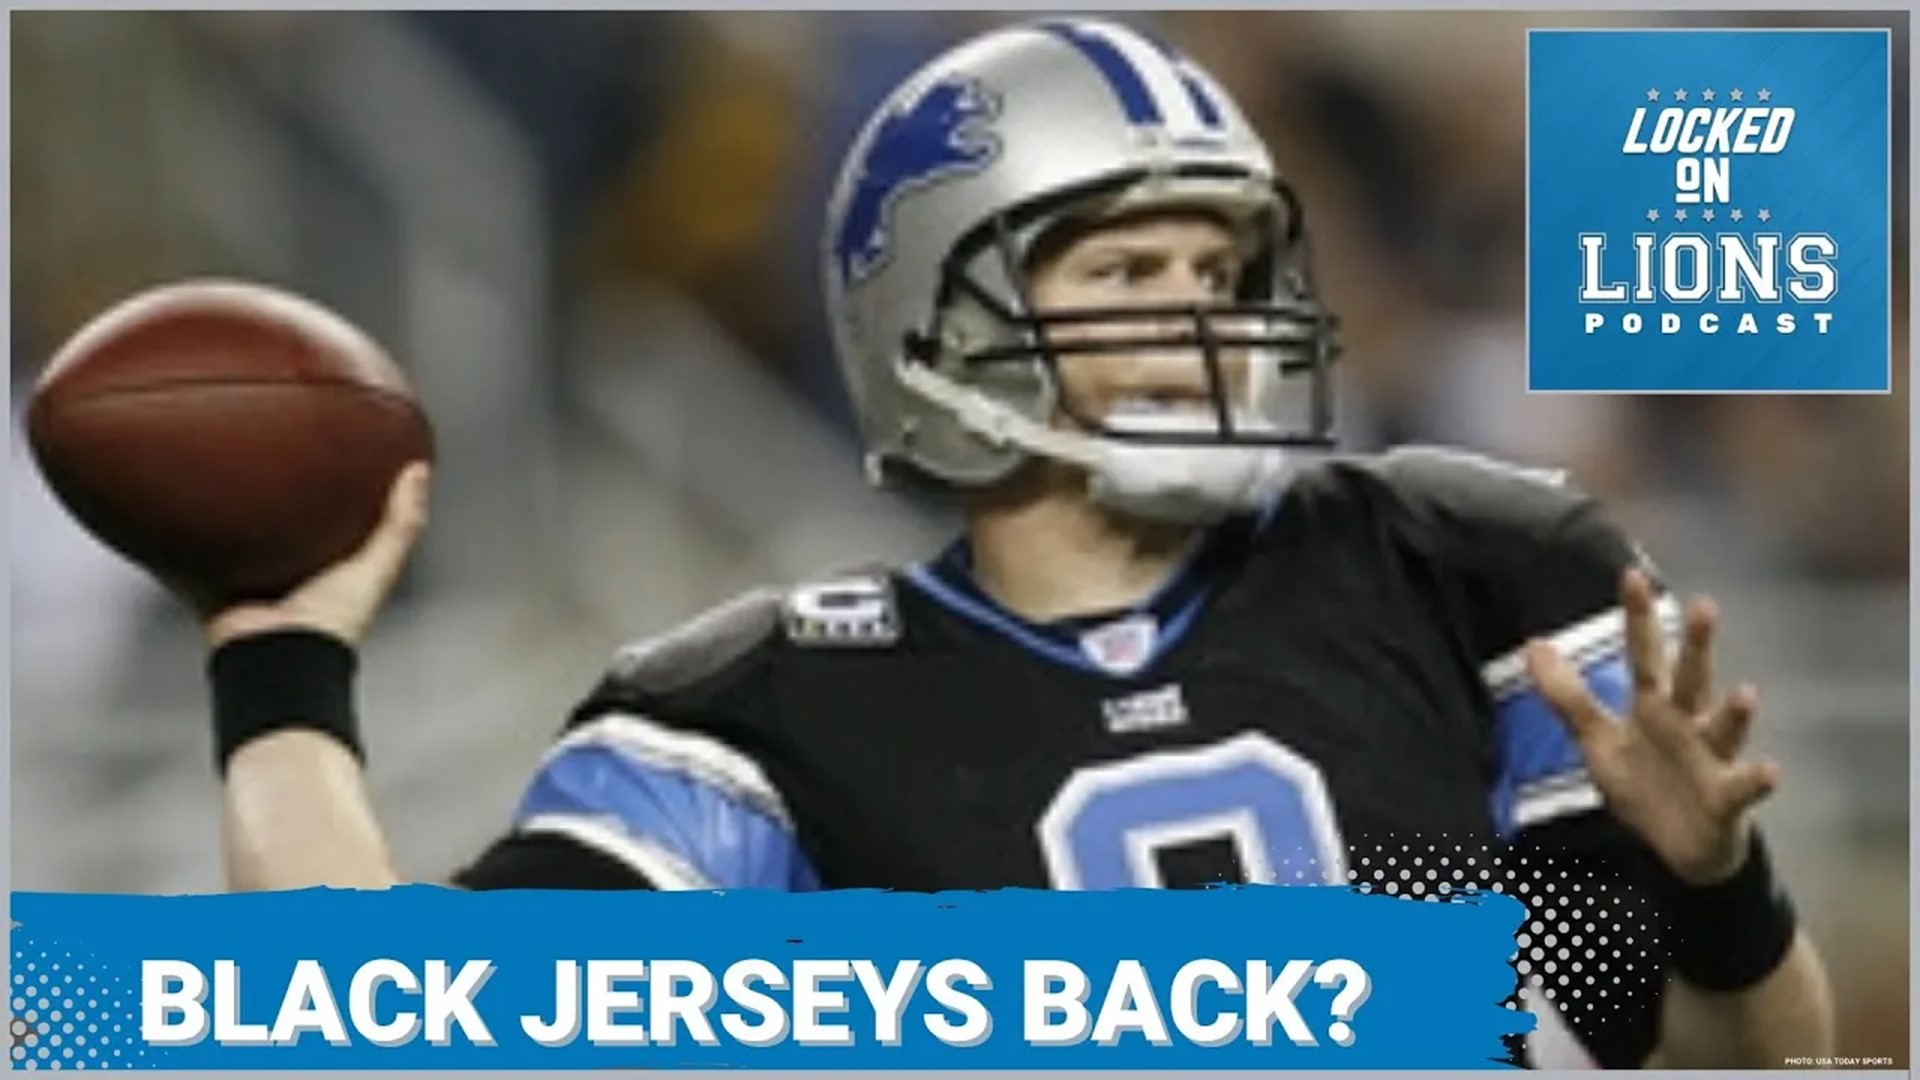 Tomorrow is the day. The Detroit Lions unveil their new uniforms and Click on Detroit dot com noticed that Dick's Sporting Goods may have leaked the uniforms.